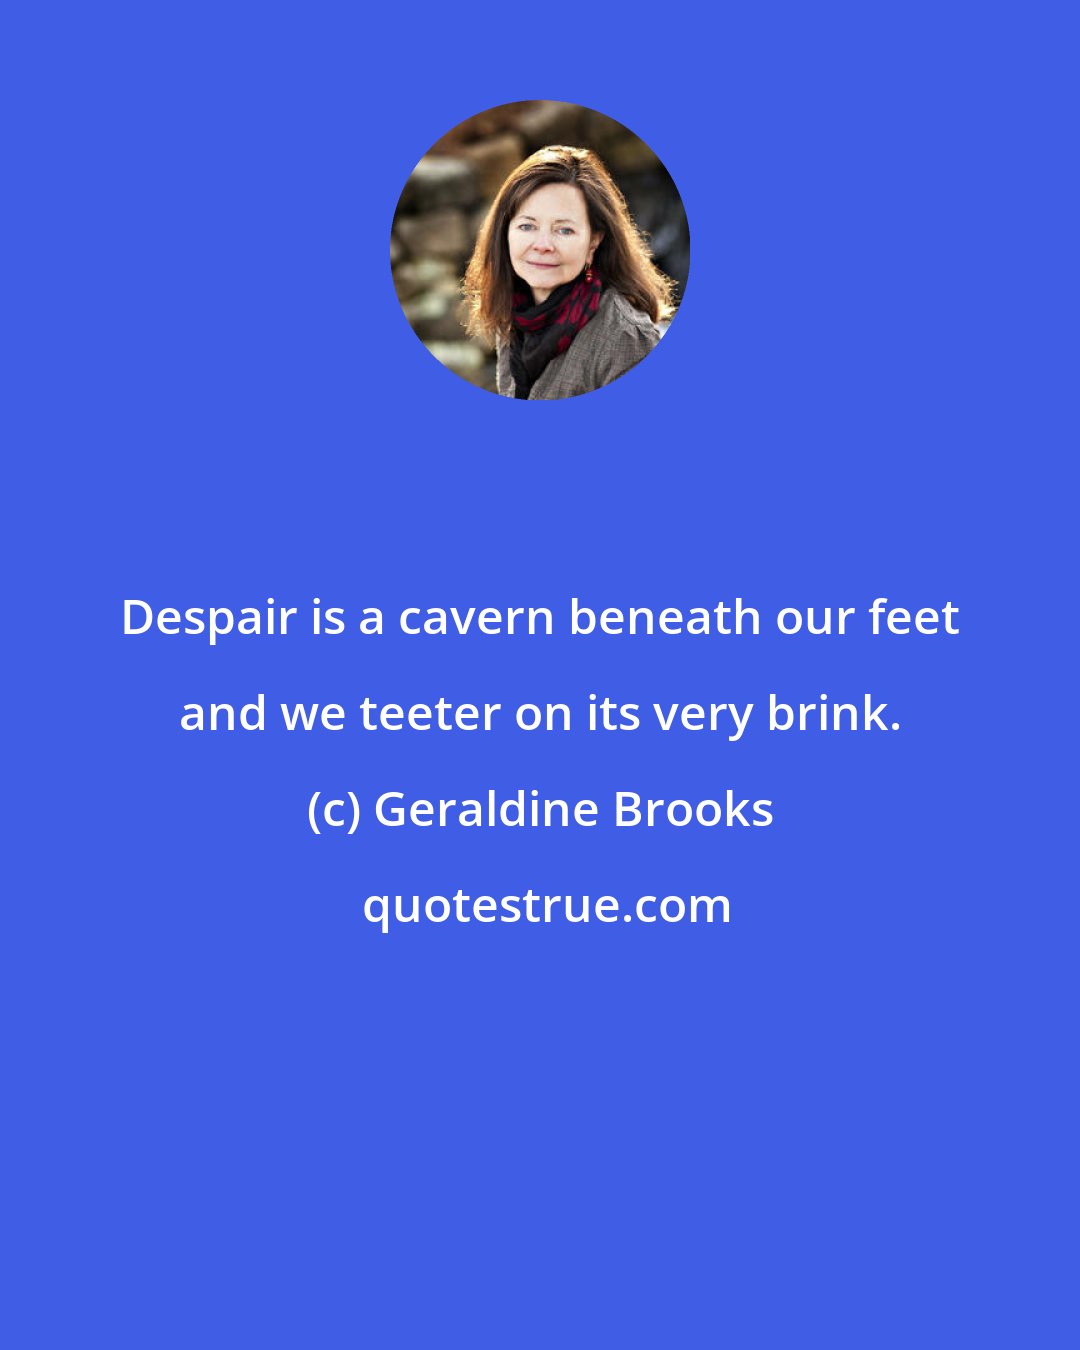 Geraldine Brooks: Despair is a cavern beneath our feet and we teeter on its very brink.